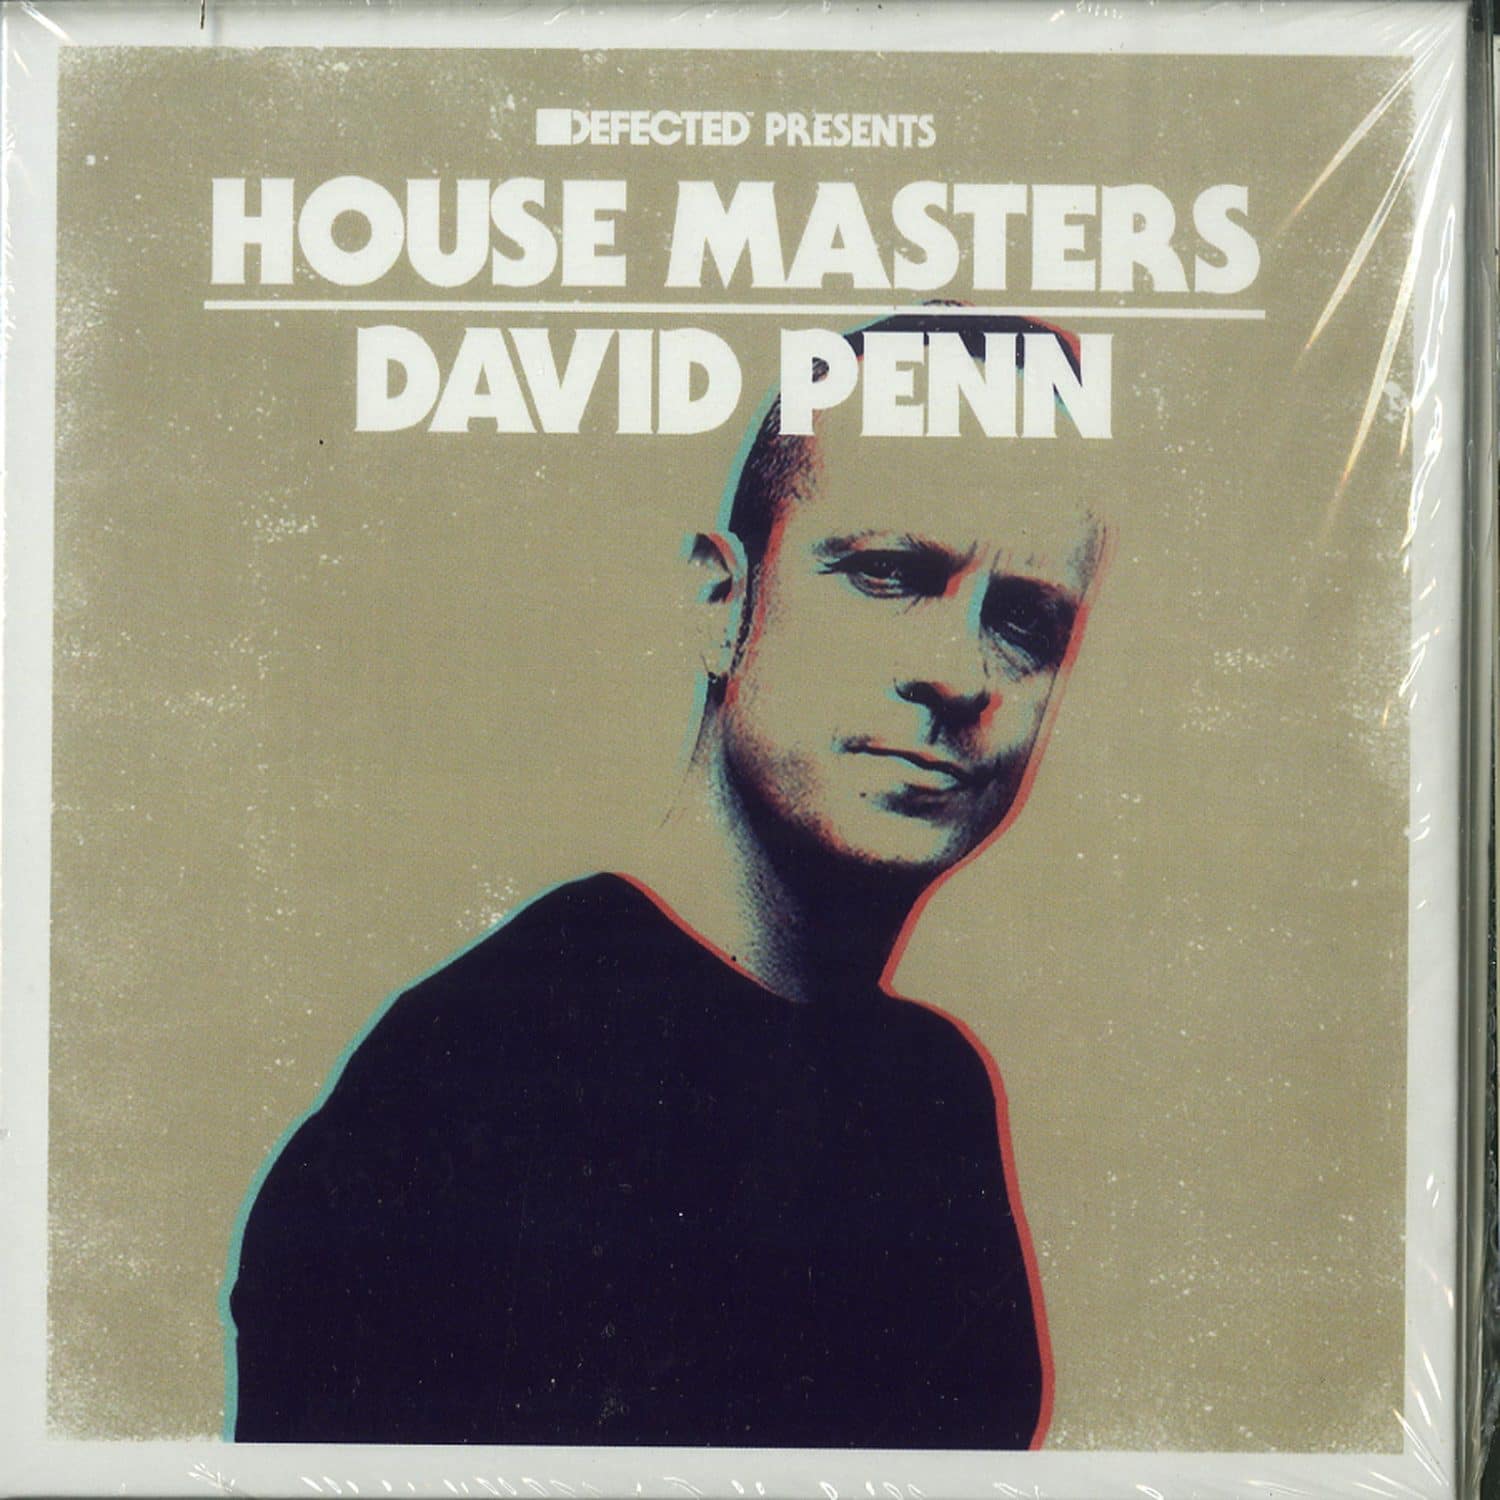 David Penn - DEFECTED PRESENTS HOUSE MASTERS 